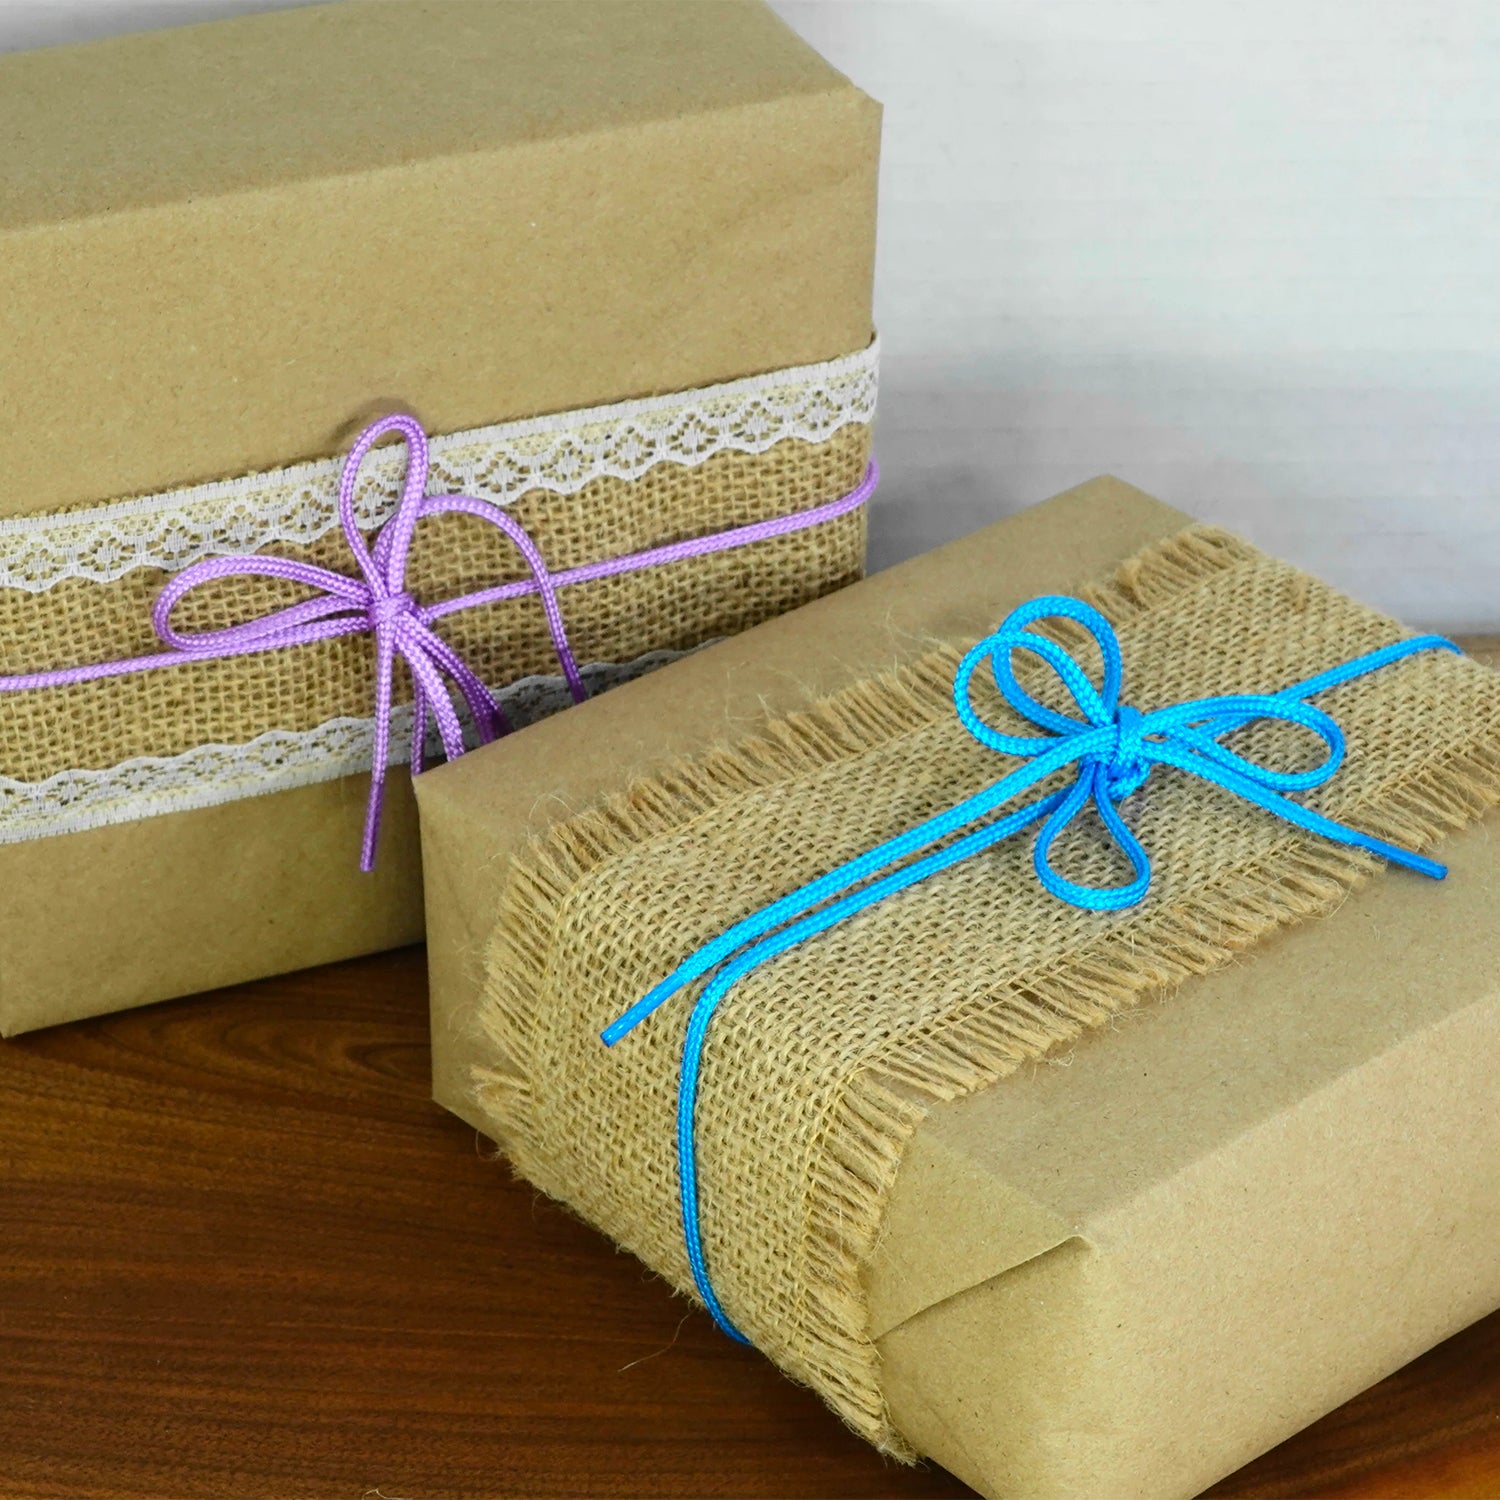 Two mystery boxes, one with pink ribbon, the other with blue ribbon.